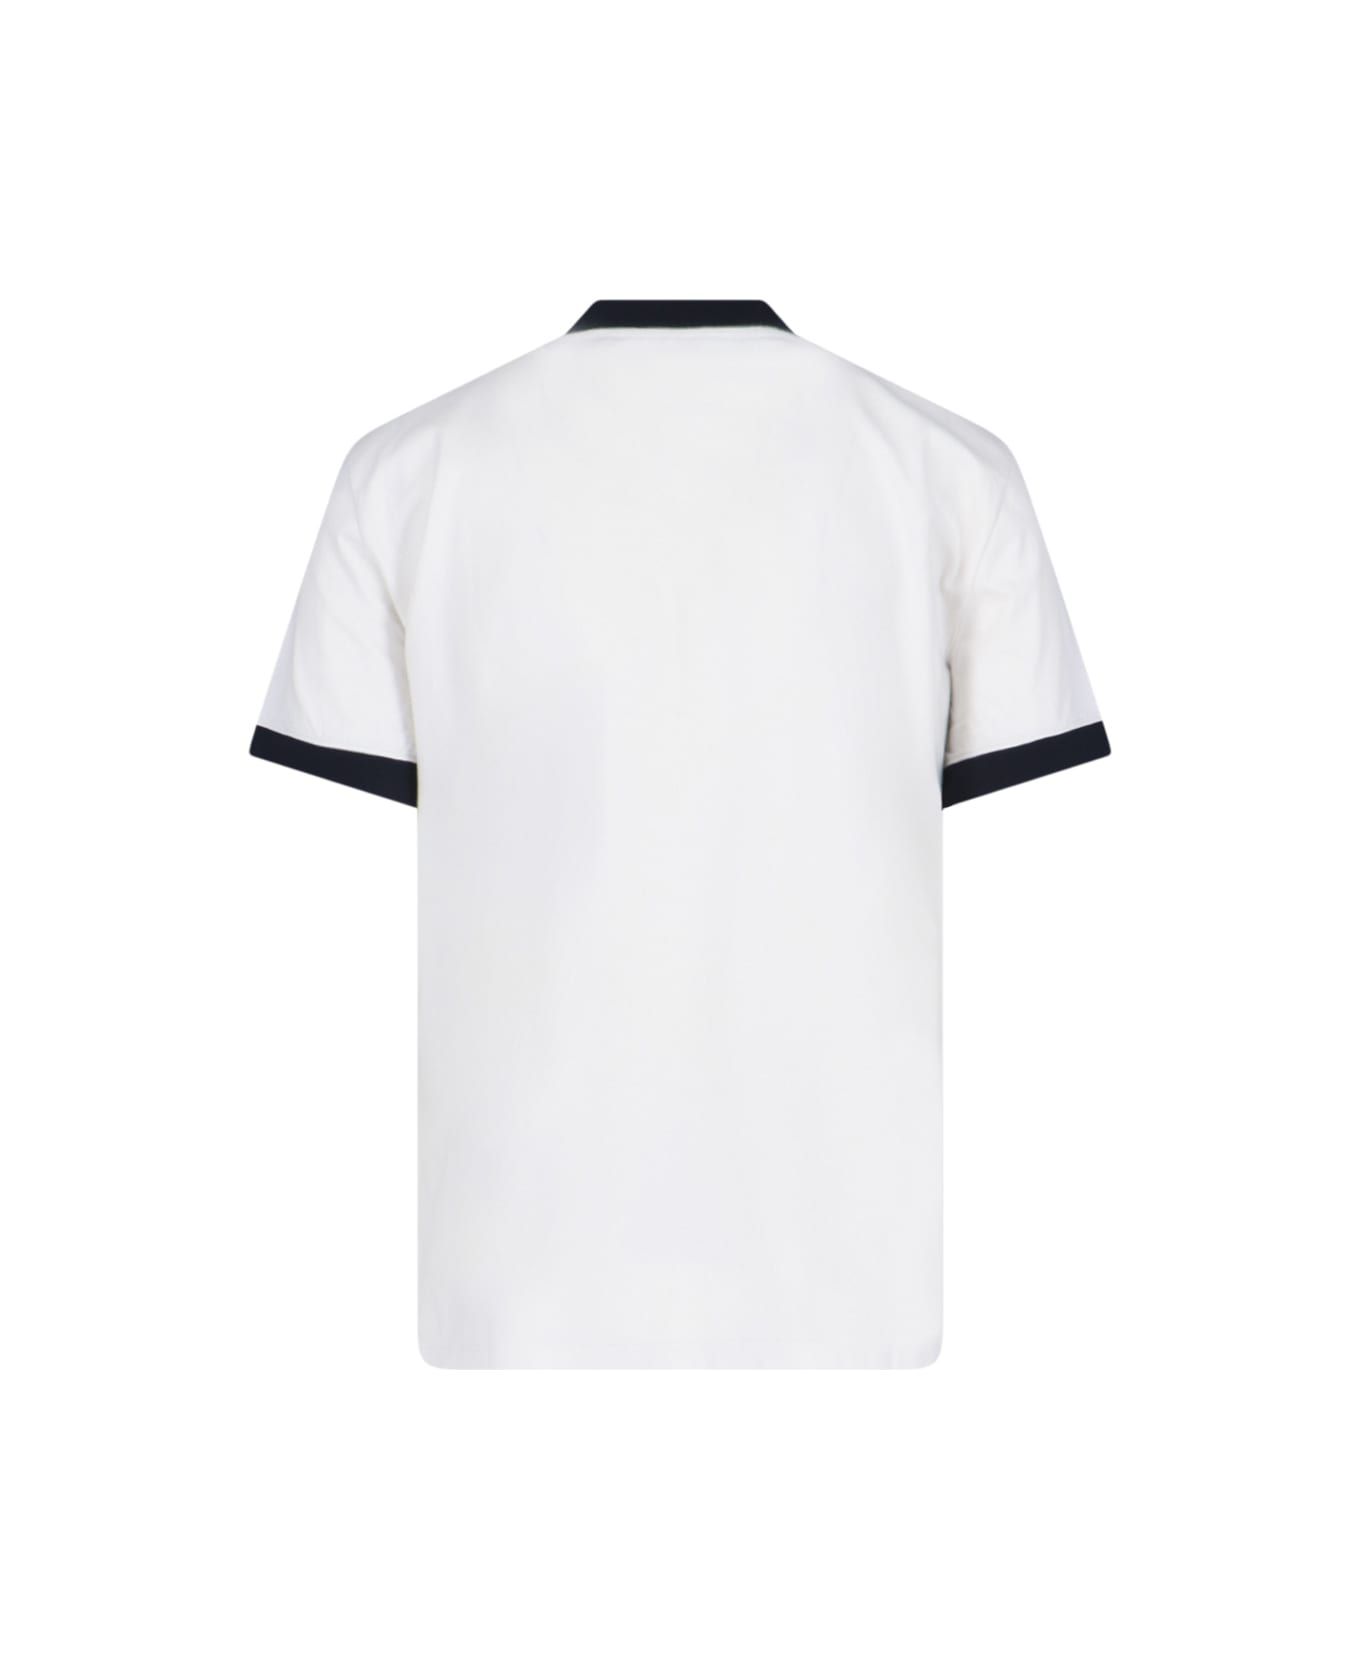 Golden Goose T-shirt With Contrasting Details - White